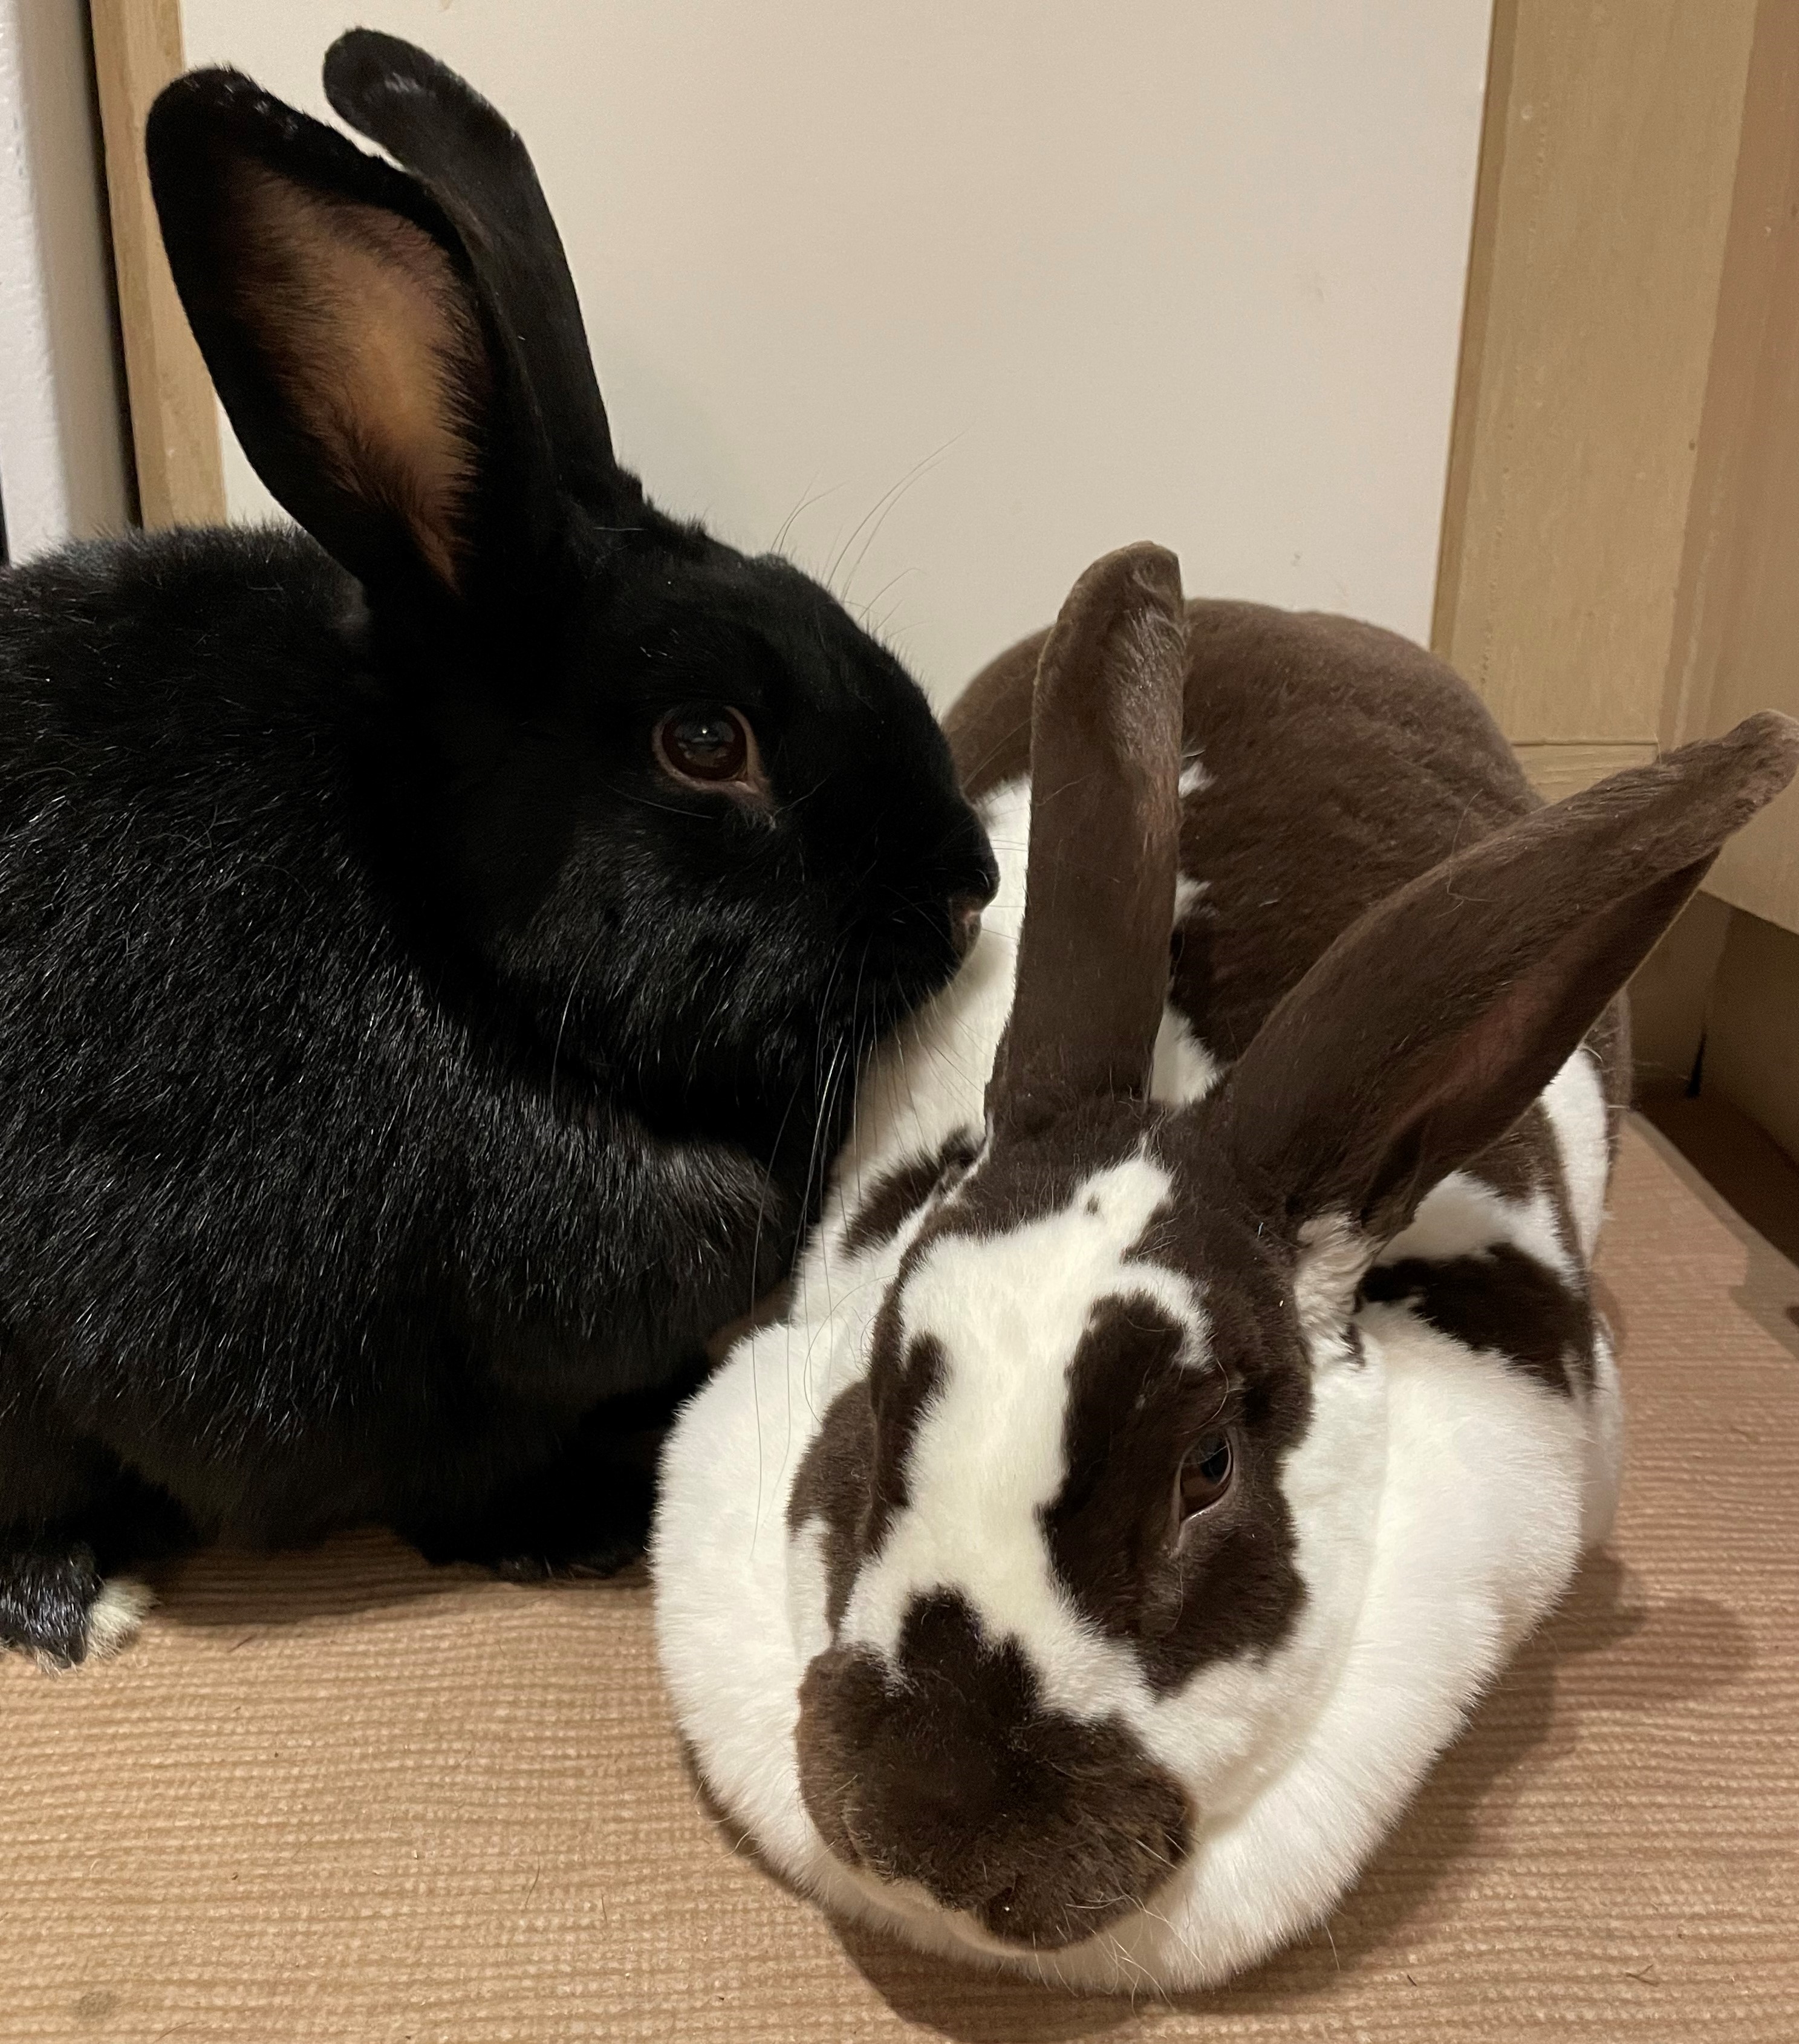 Photo of two rabbits, standing next to each other to have their photo taken. The rabbit on the left is black, with his ears pert, and his friend on the right is brown and white, with distinctive markings on its face.